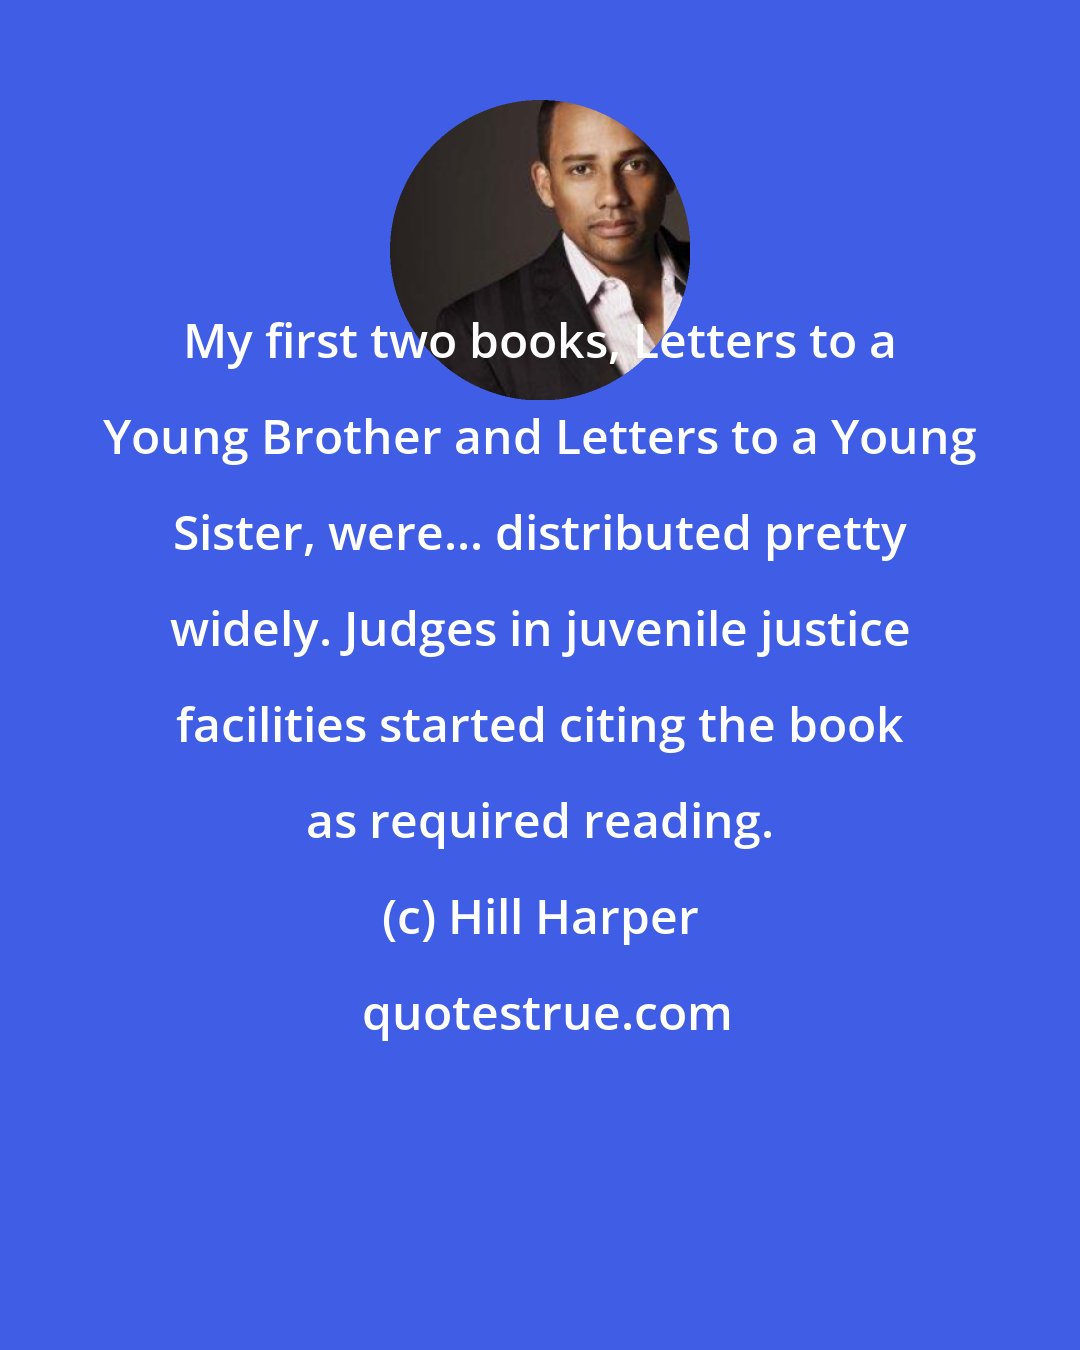 Hill Harper: My first two books, Letters to a Young Brother and Letters to a Young Sister, were... distributed pretty widely. Judges in juvenile justice facilities started citing the book as required reading.